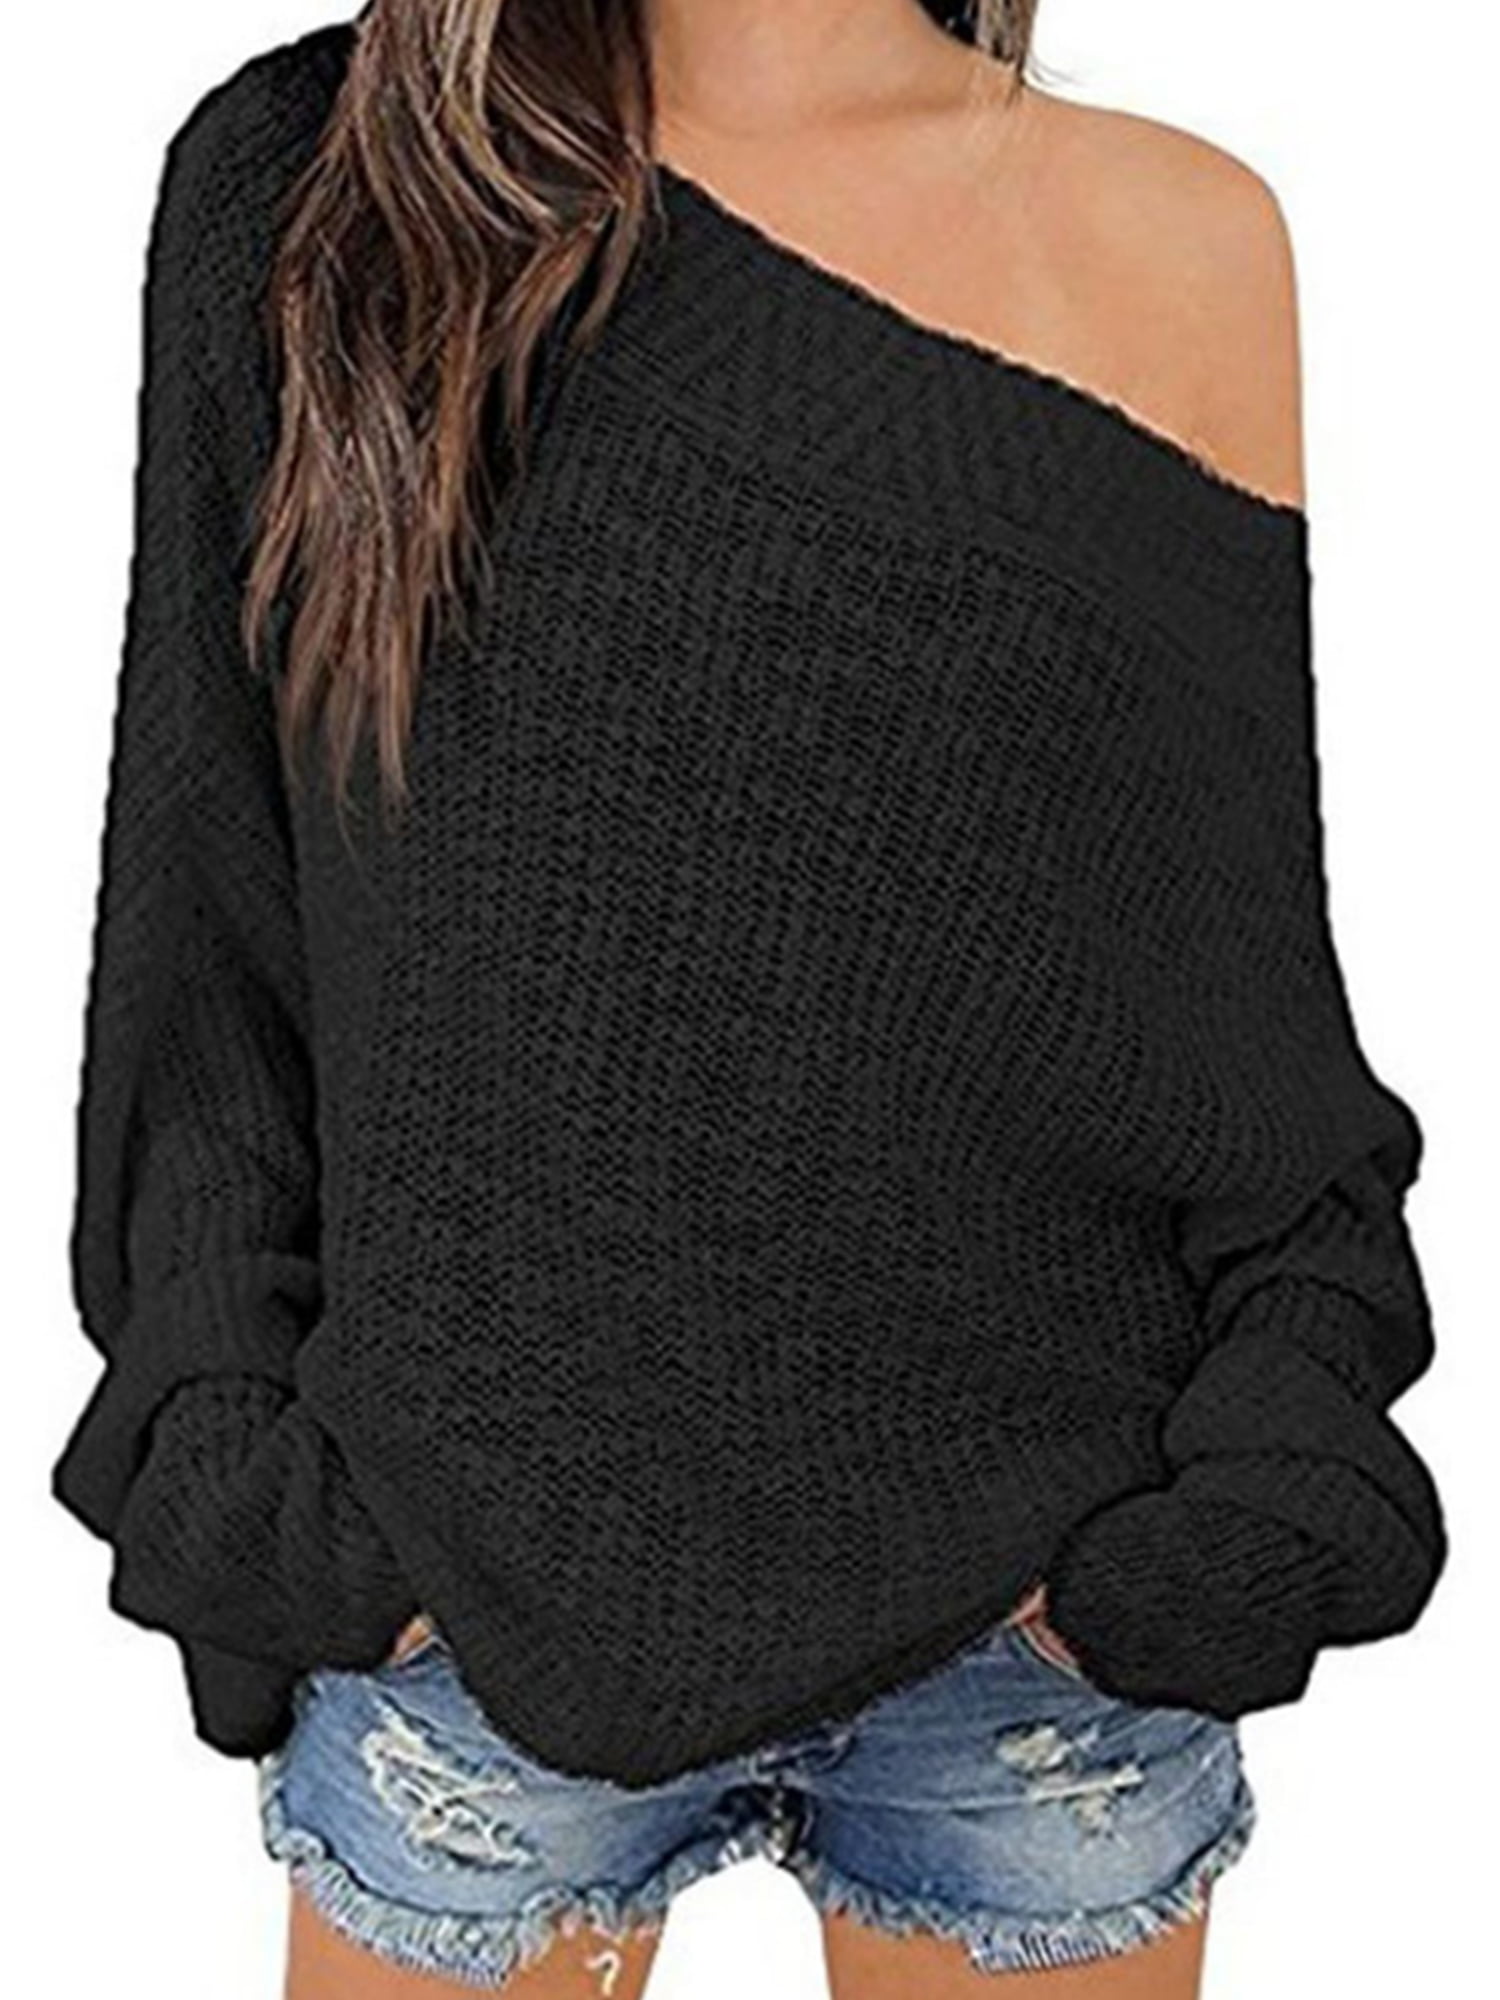 OmicGot Women's Off The Shoulder Long Sleeve Pullover Knit Jumper Baggy Solid Sweater